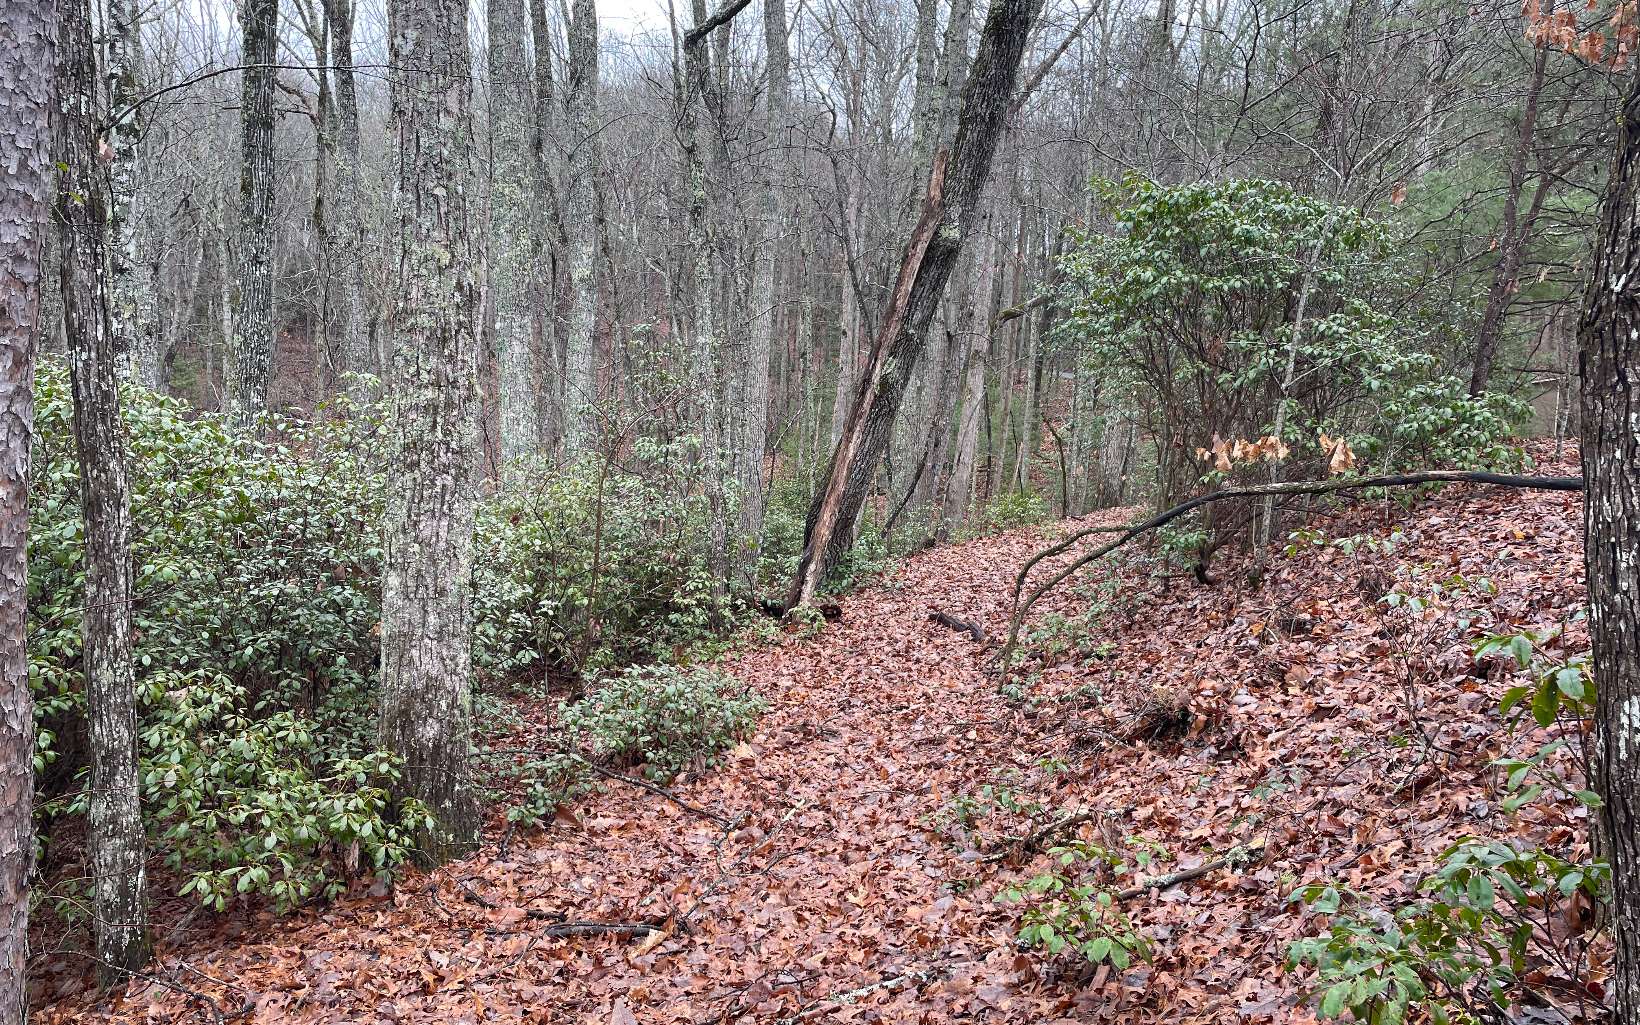 ***Lot with a View*** located on the south side of Blairsville near the Trackrock area. A short distance to all the attractions like, Vogel State Park, AT approach trails, Blood Mountain, Brasstown Bald and much more... Come check this out for your mountain home.